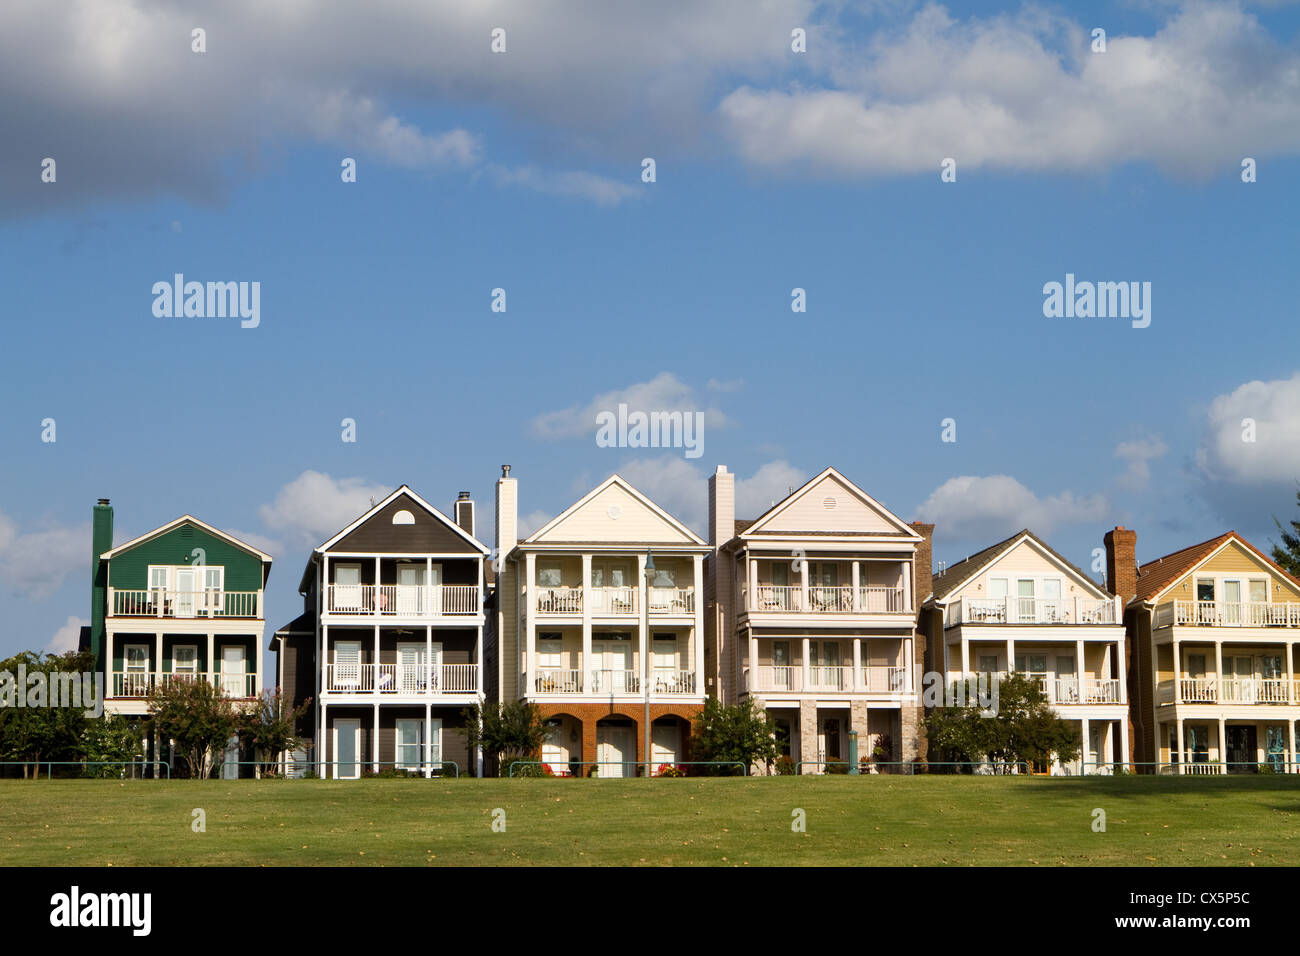 Upscale townhomes for the wealthy built on a grass hill in a row against a cloudy blue sky in Memphis, Tennessee. Stock Photo